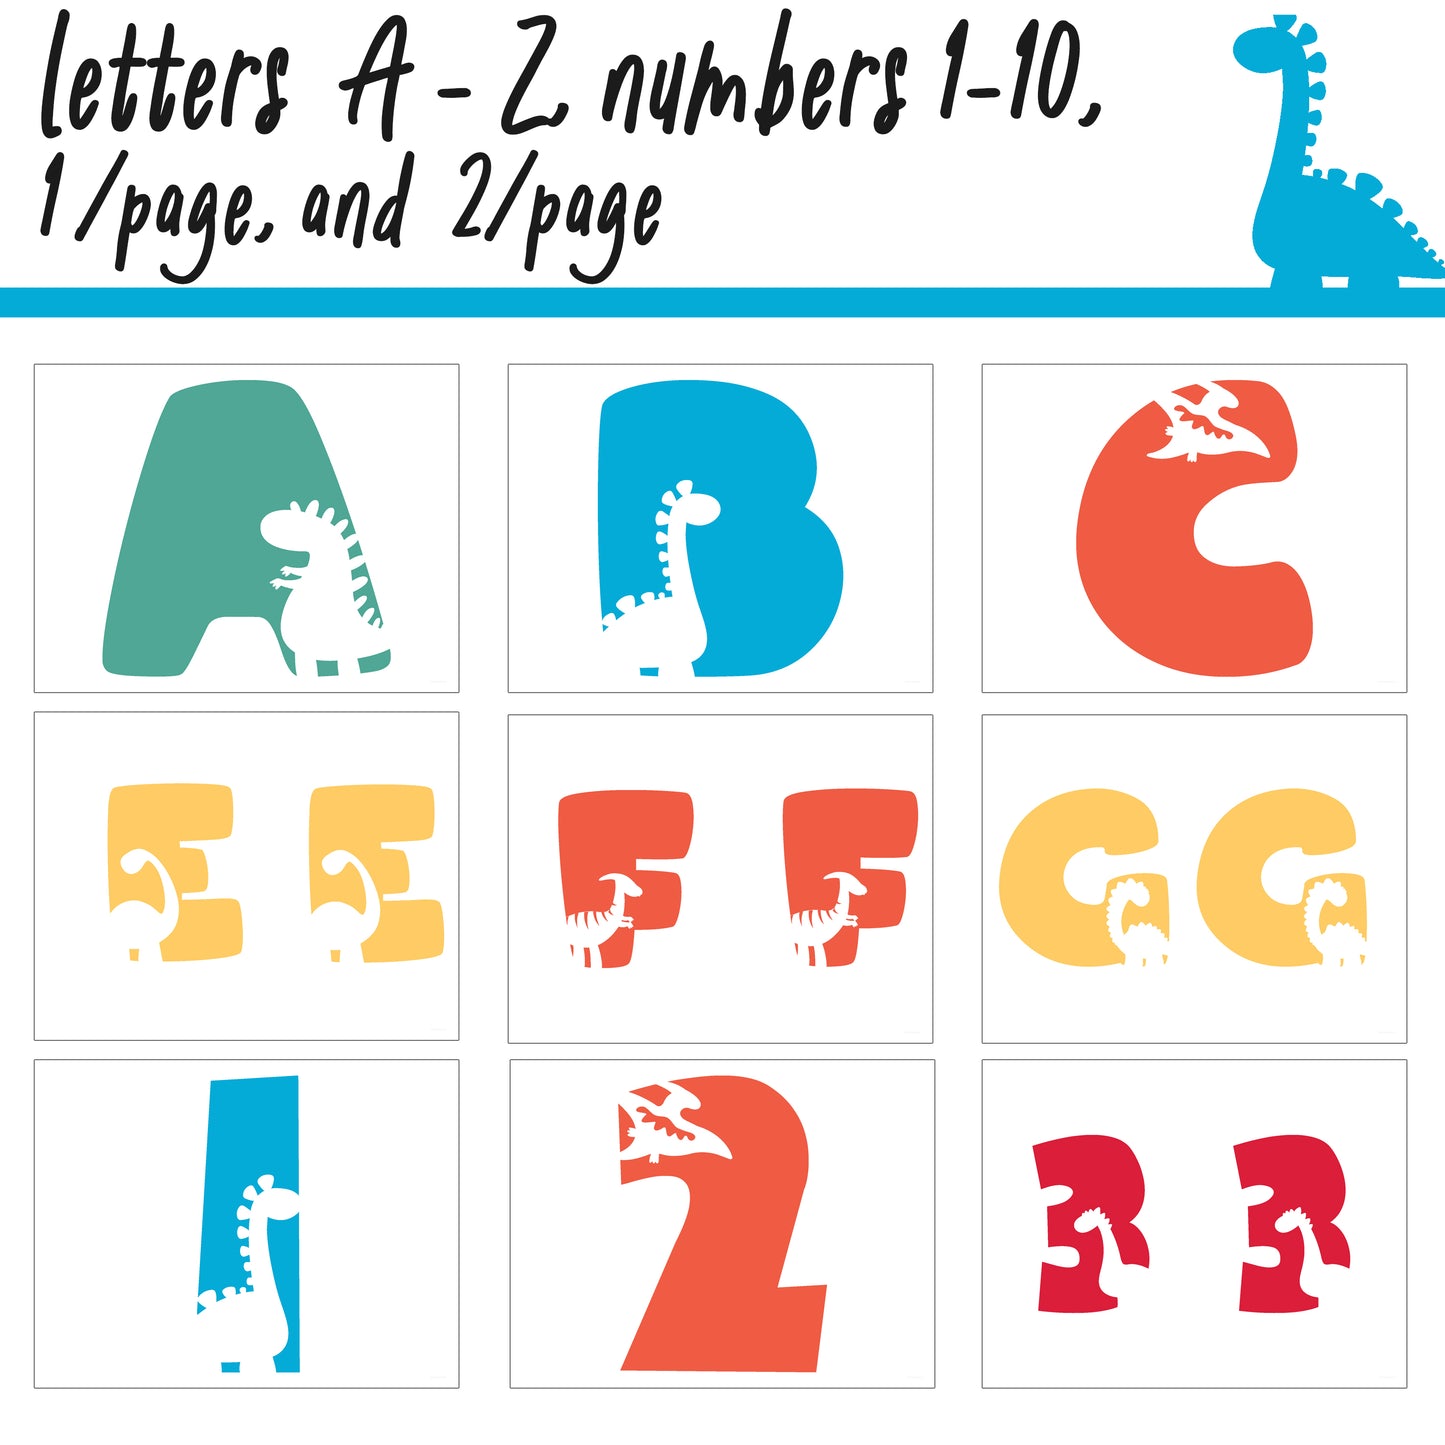 Dinosaur Bulletin Board Letters | A - Z, Letters and Numbers,1 and 2 Per Page, Colorful Classroom Decor